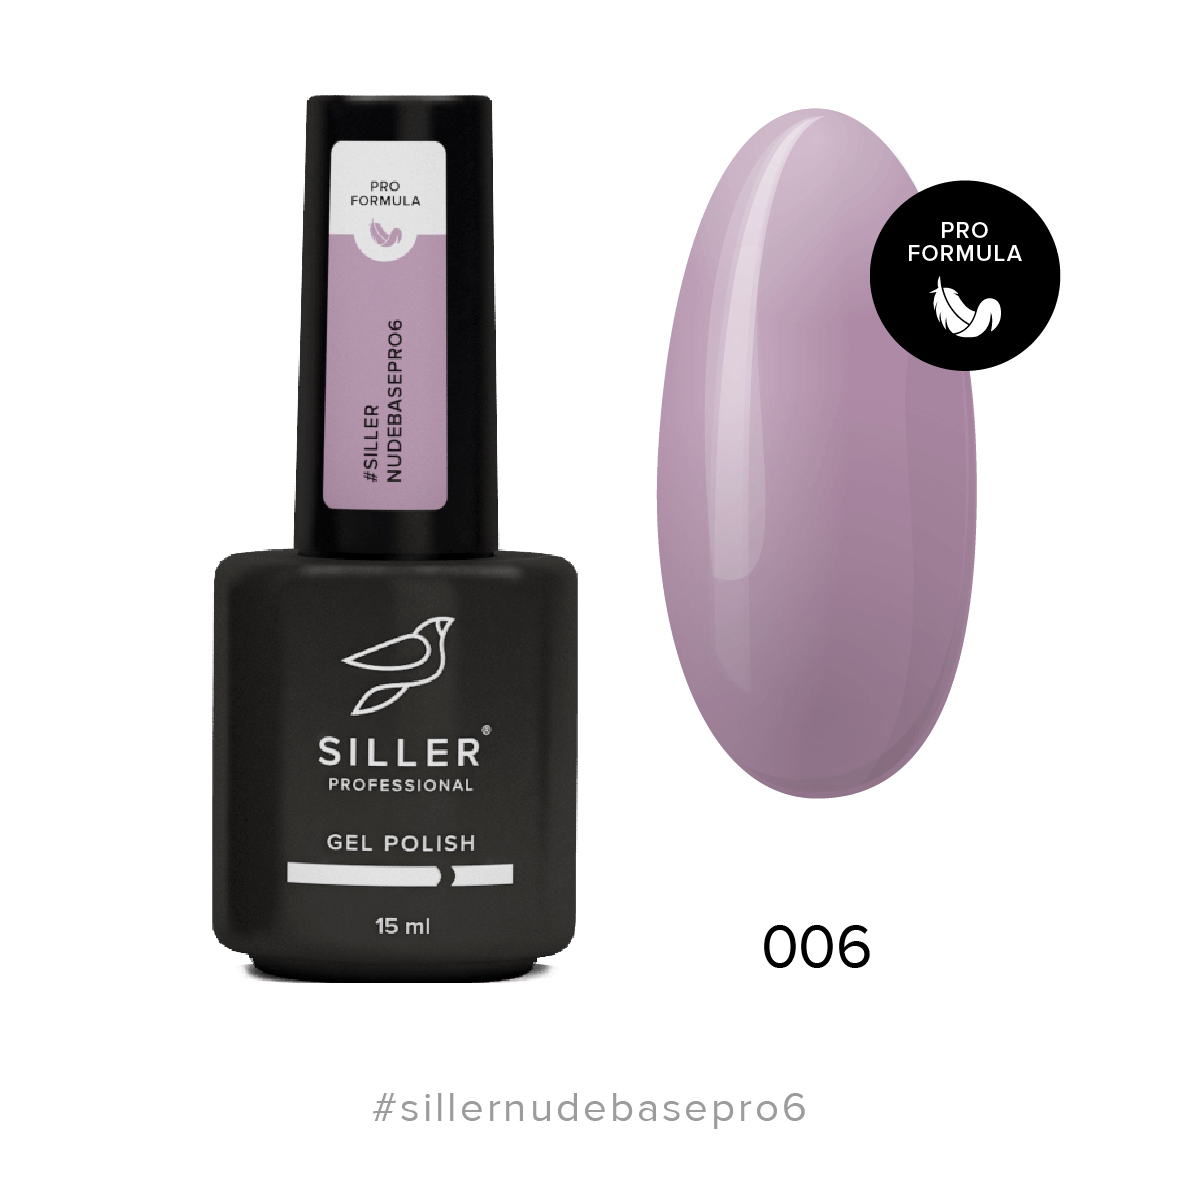 Siller Nude Base Pro #6 - Dusty Lilac